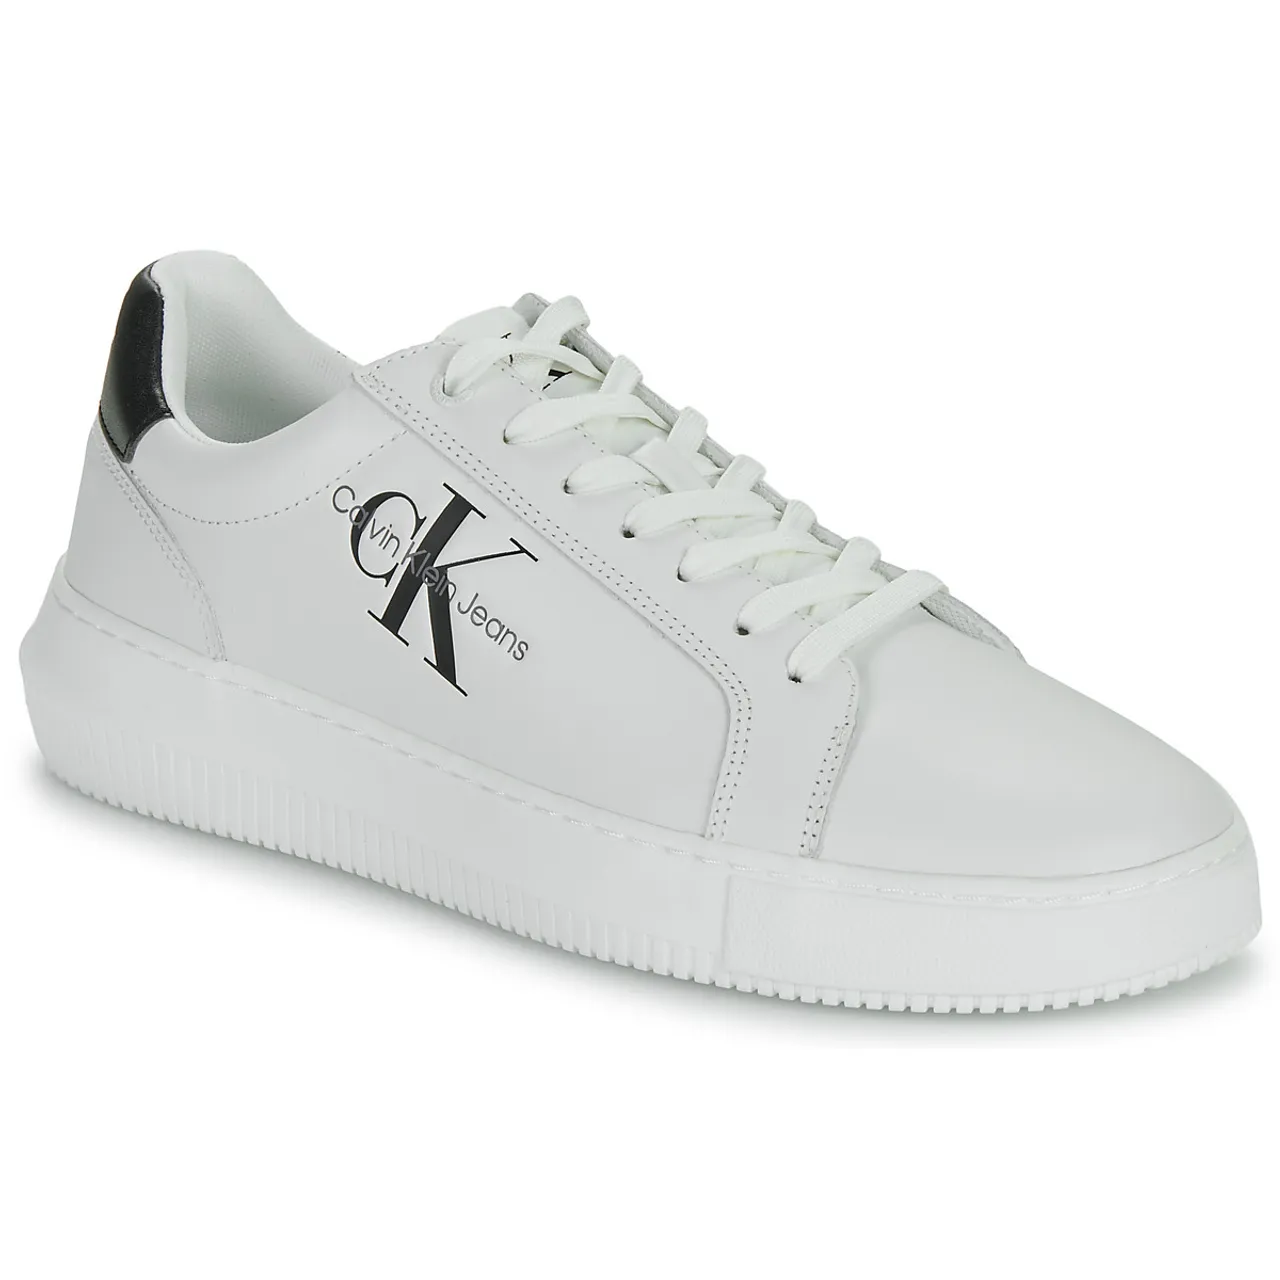 Calvin Klein Jeans  CHUNKY CUPSOLE MONO LTH  men's Shoes (Trainers) in White